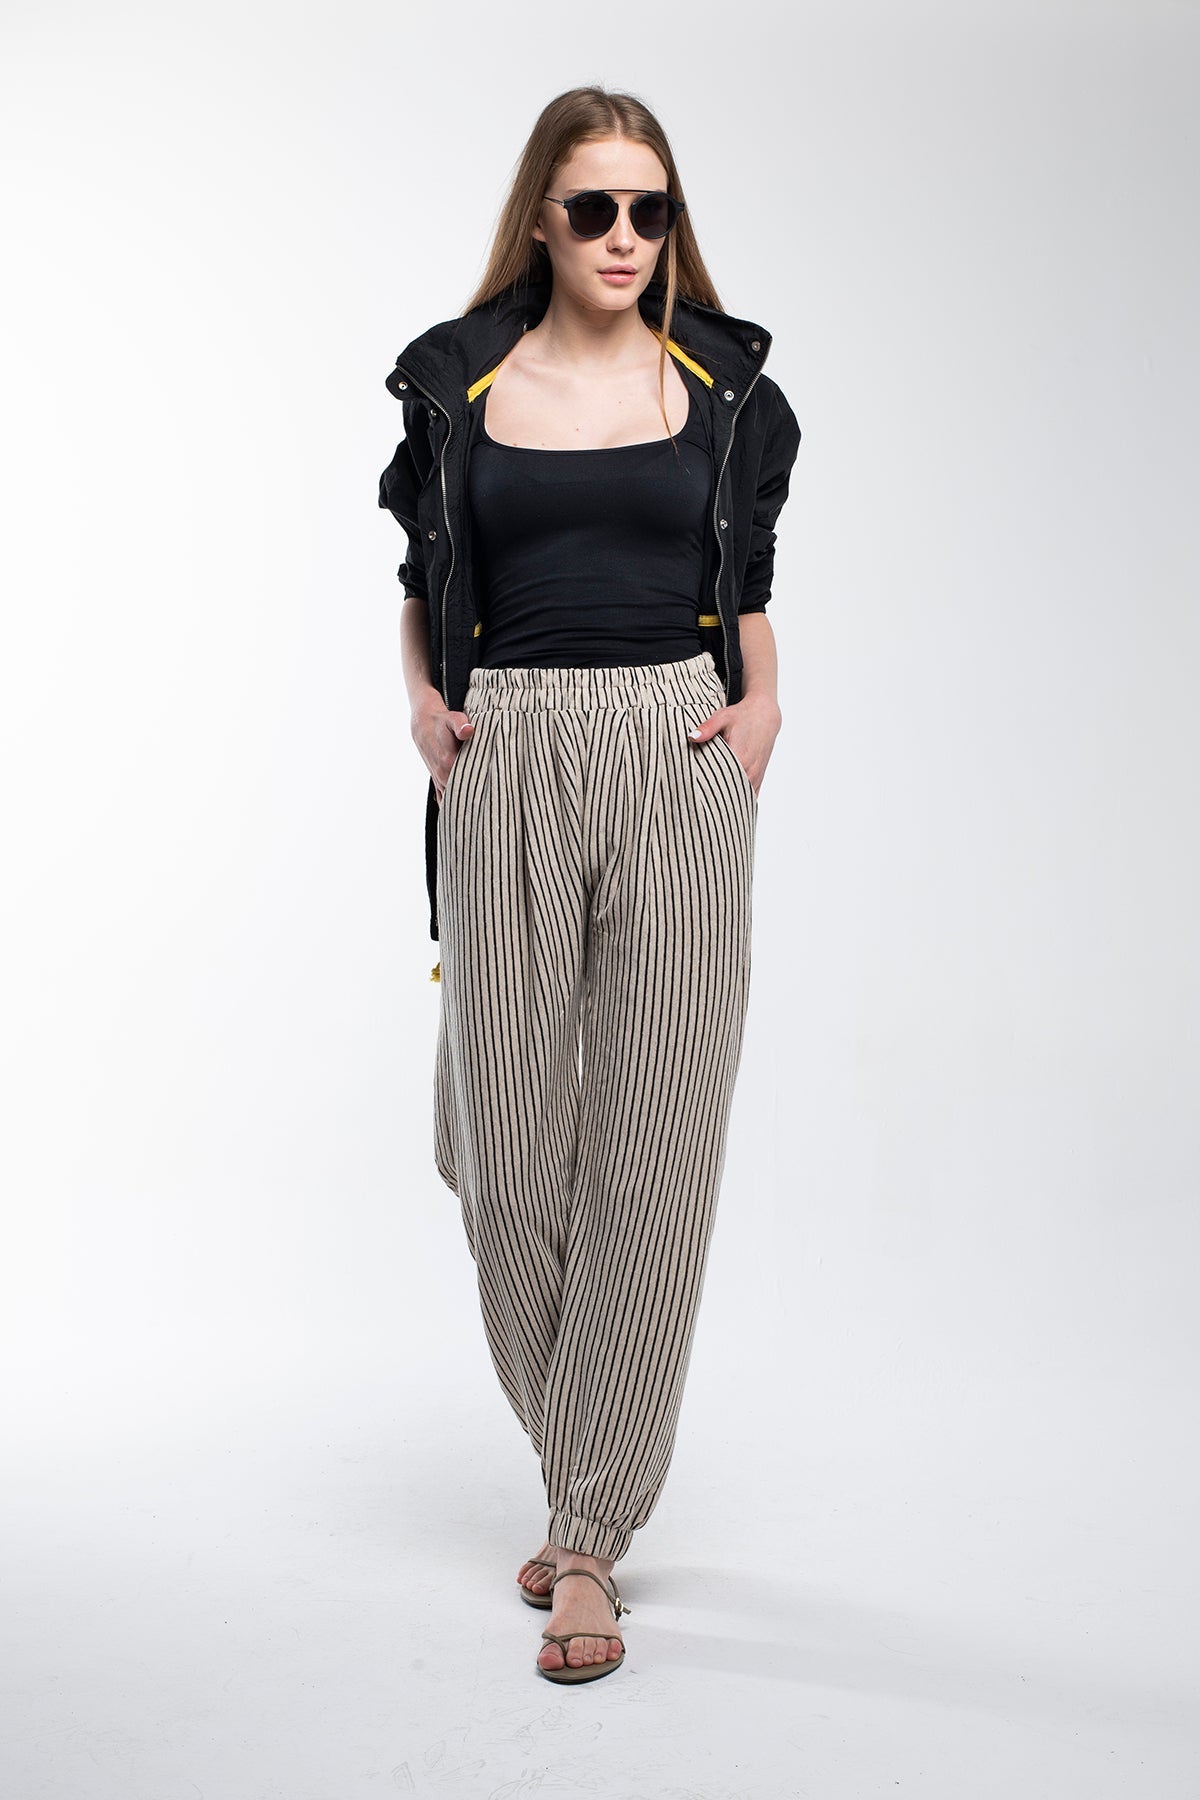 Striped Linen Pants with Elastic Legs